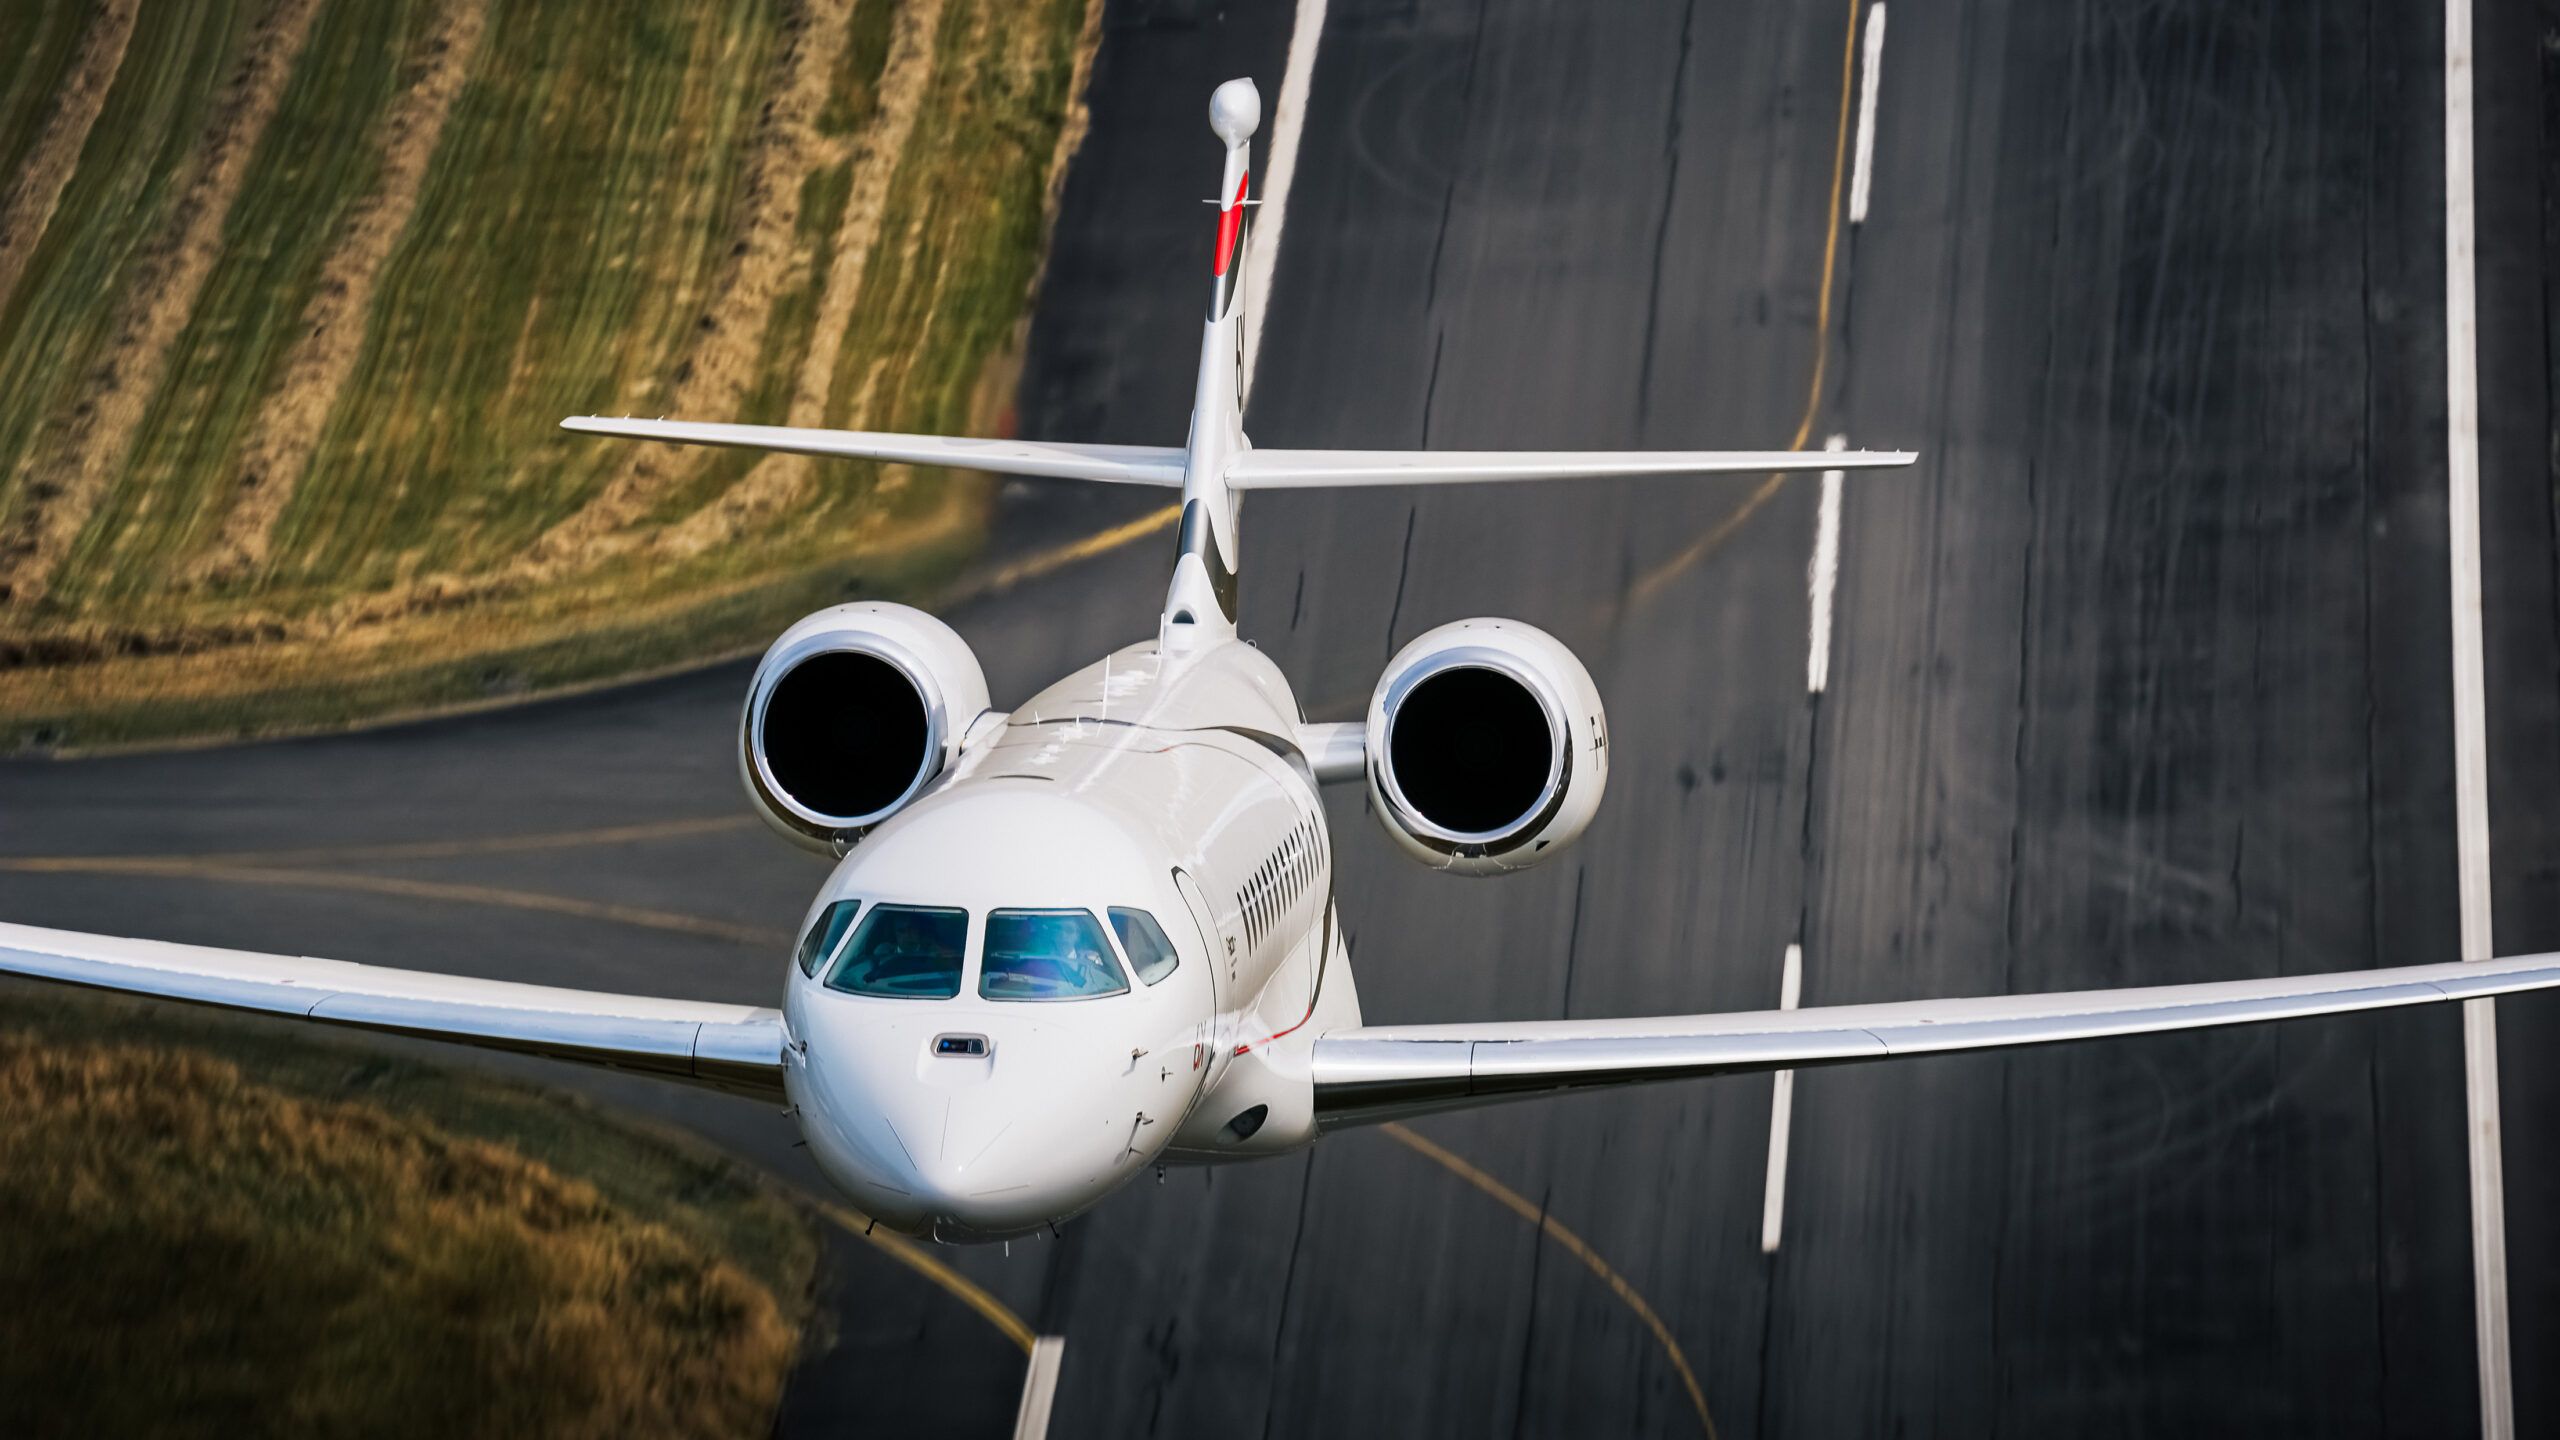 What Sorts Of Landing Fees Do Private Jets Face?